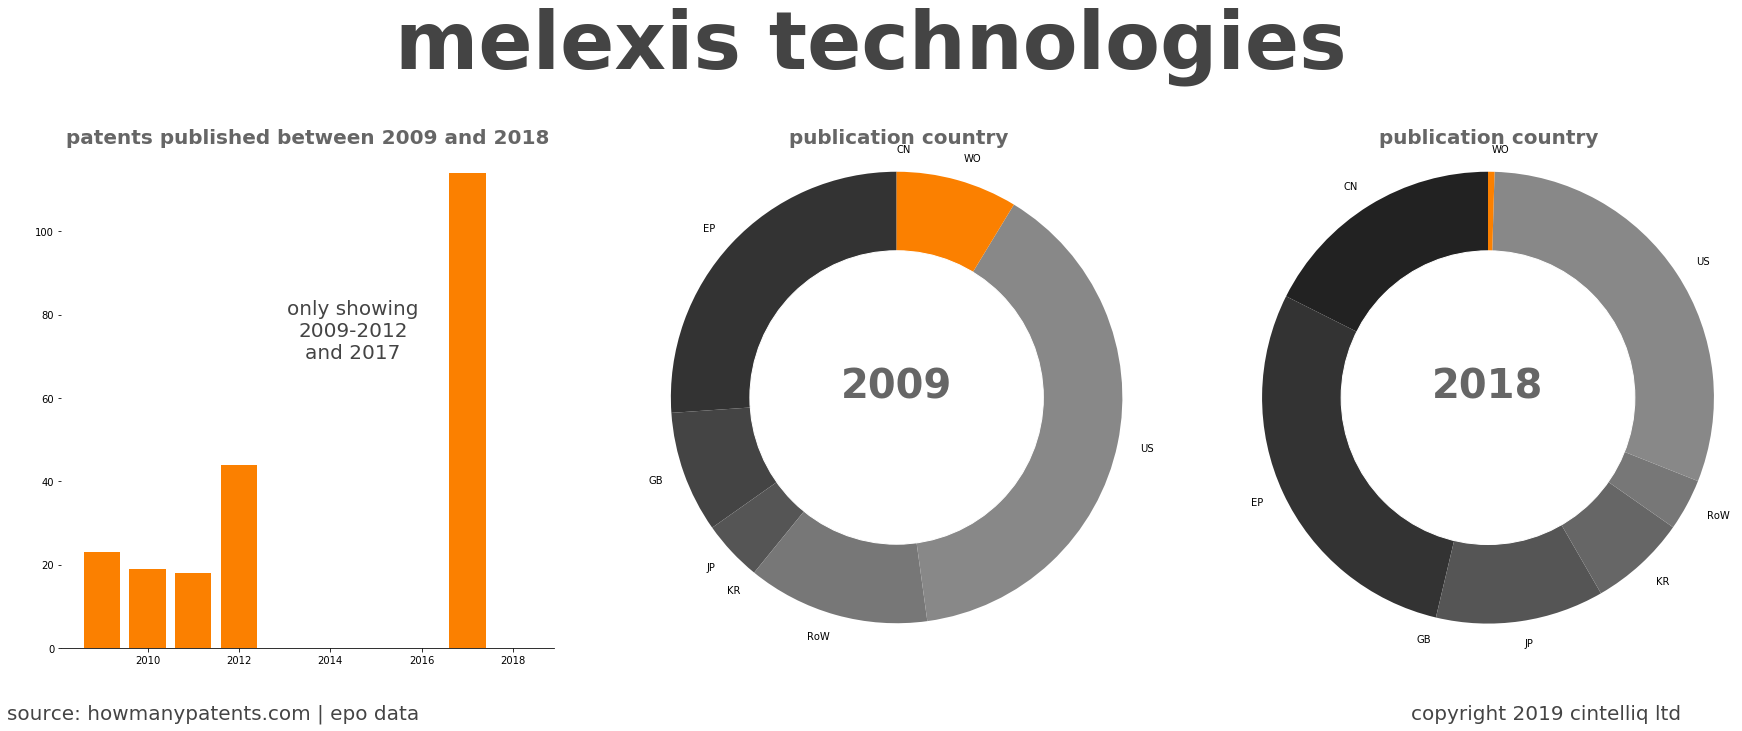 summary of patents for Melexis Technologies